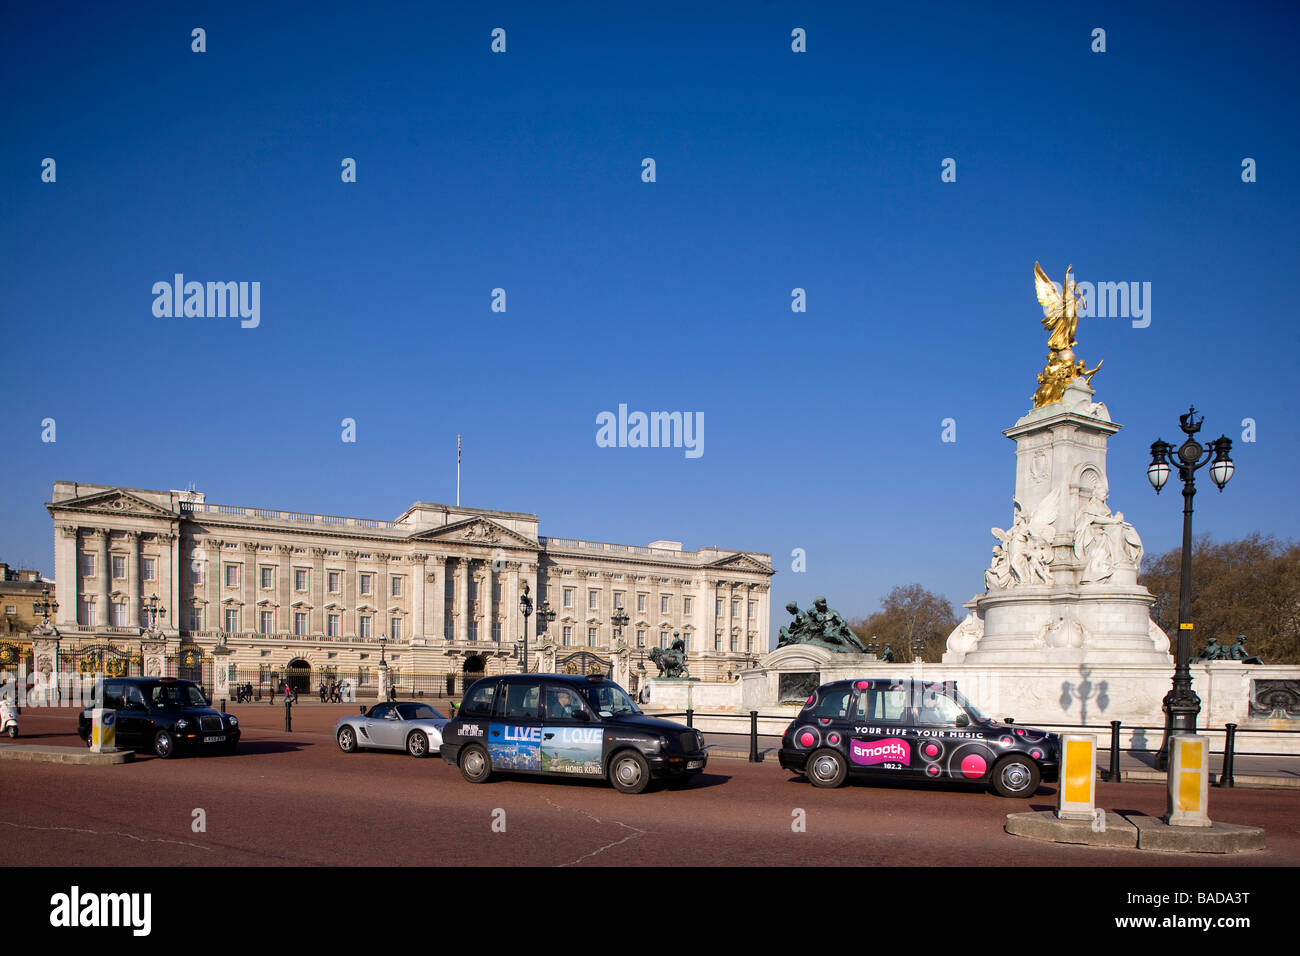 United Kingdom, London, Queen Victoria Memorial in front of Buckingham Palace Stock Photo